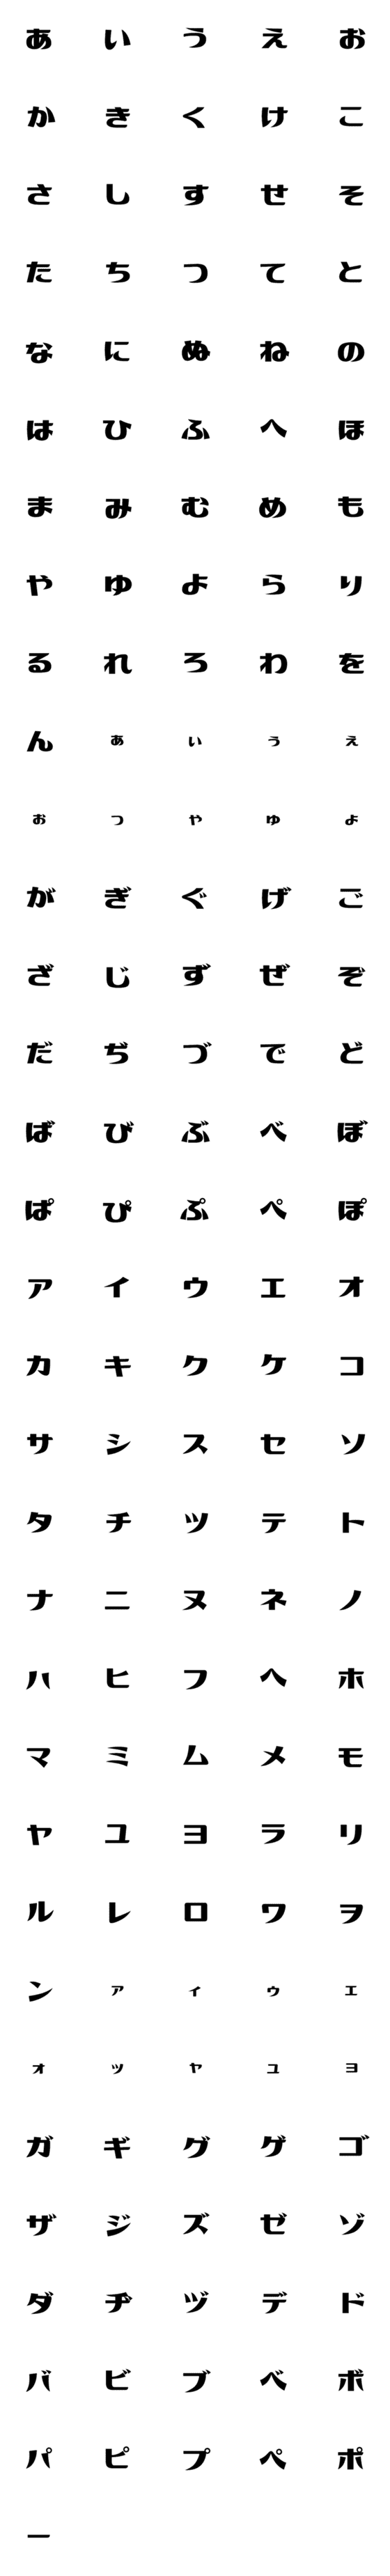 [LINE絵文字]モダンな. デコ文字の画像一覧